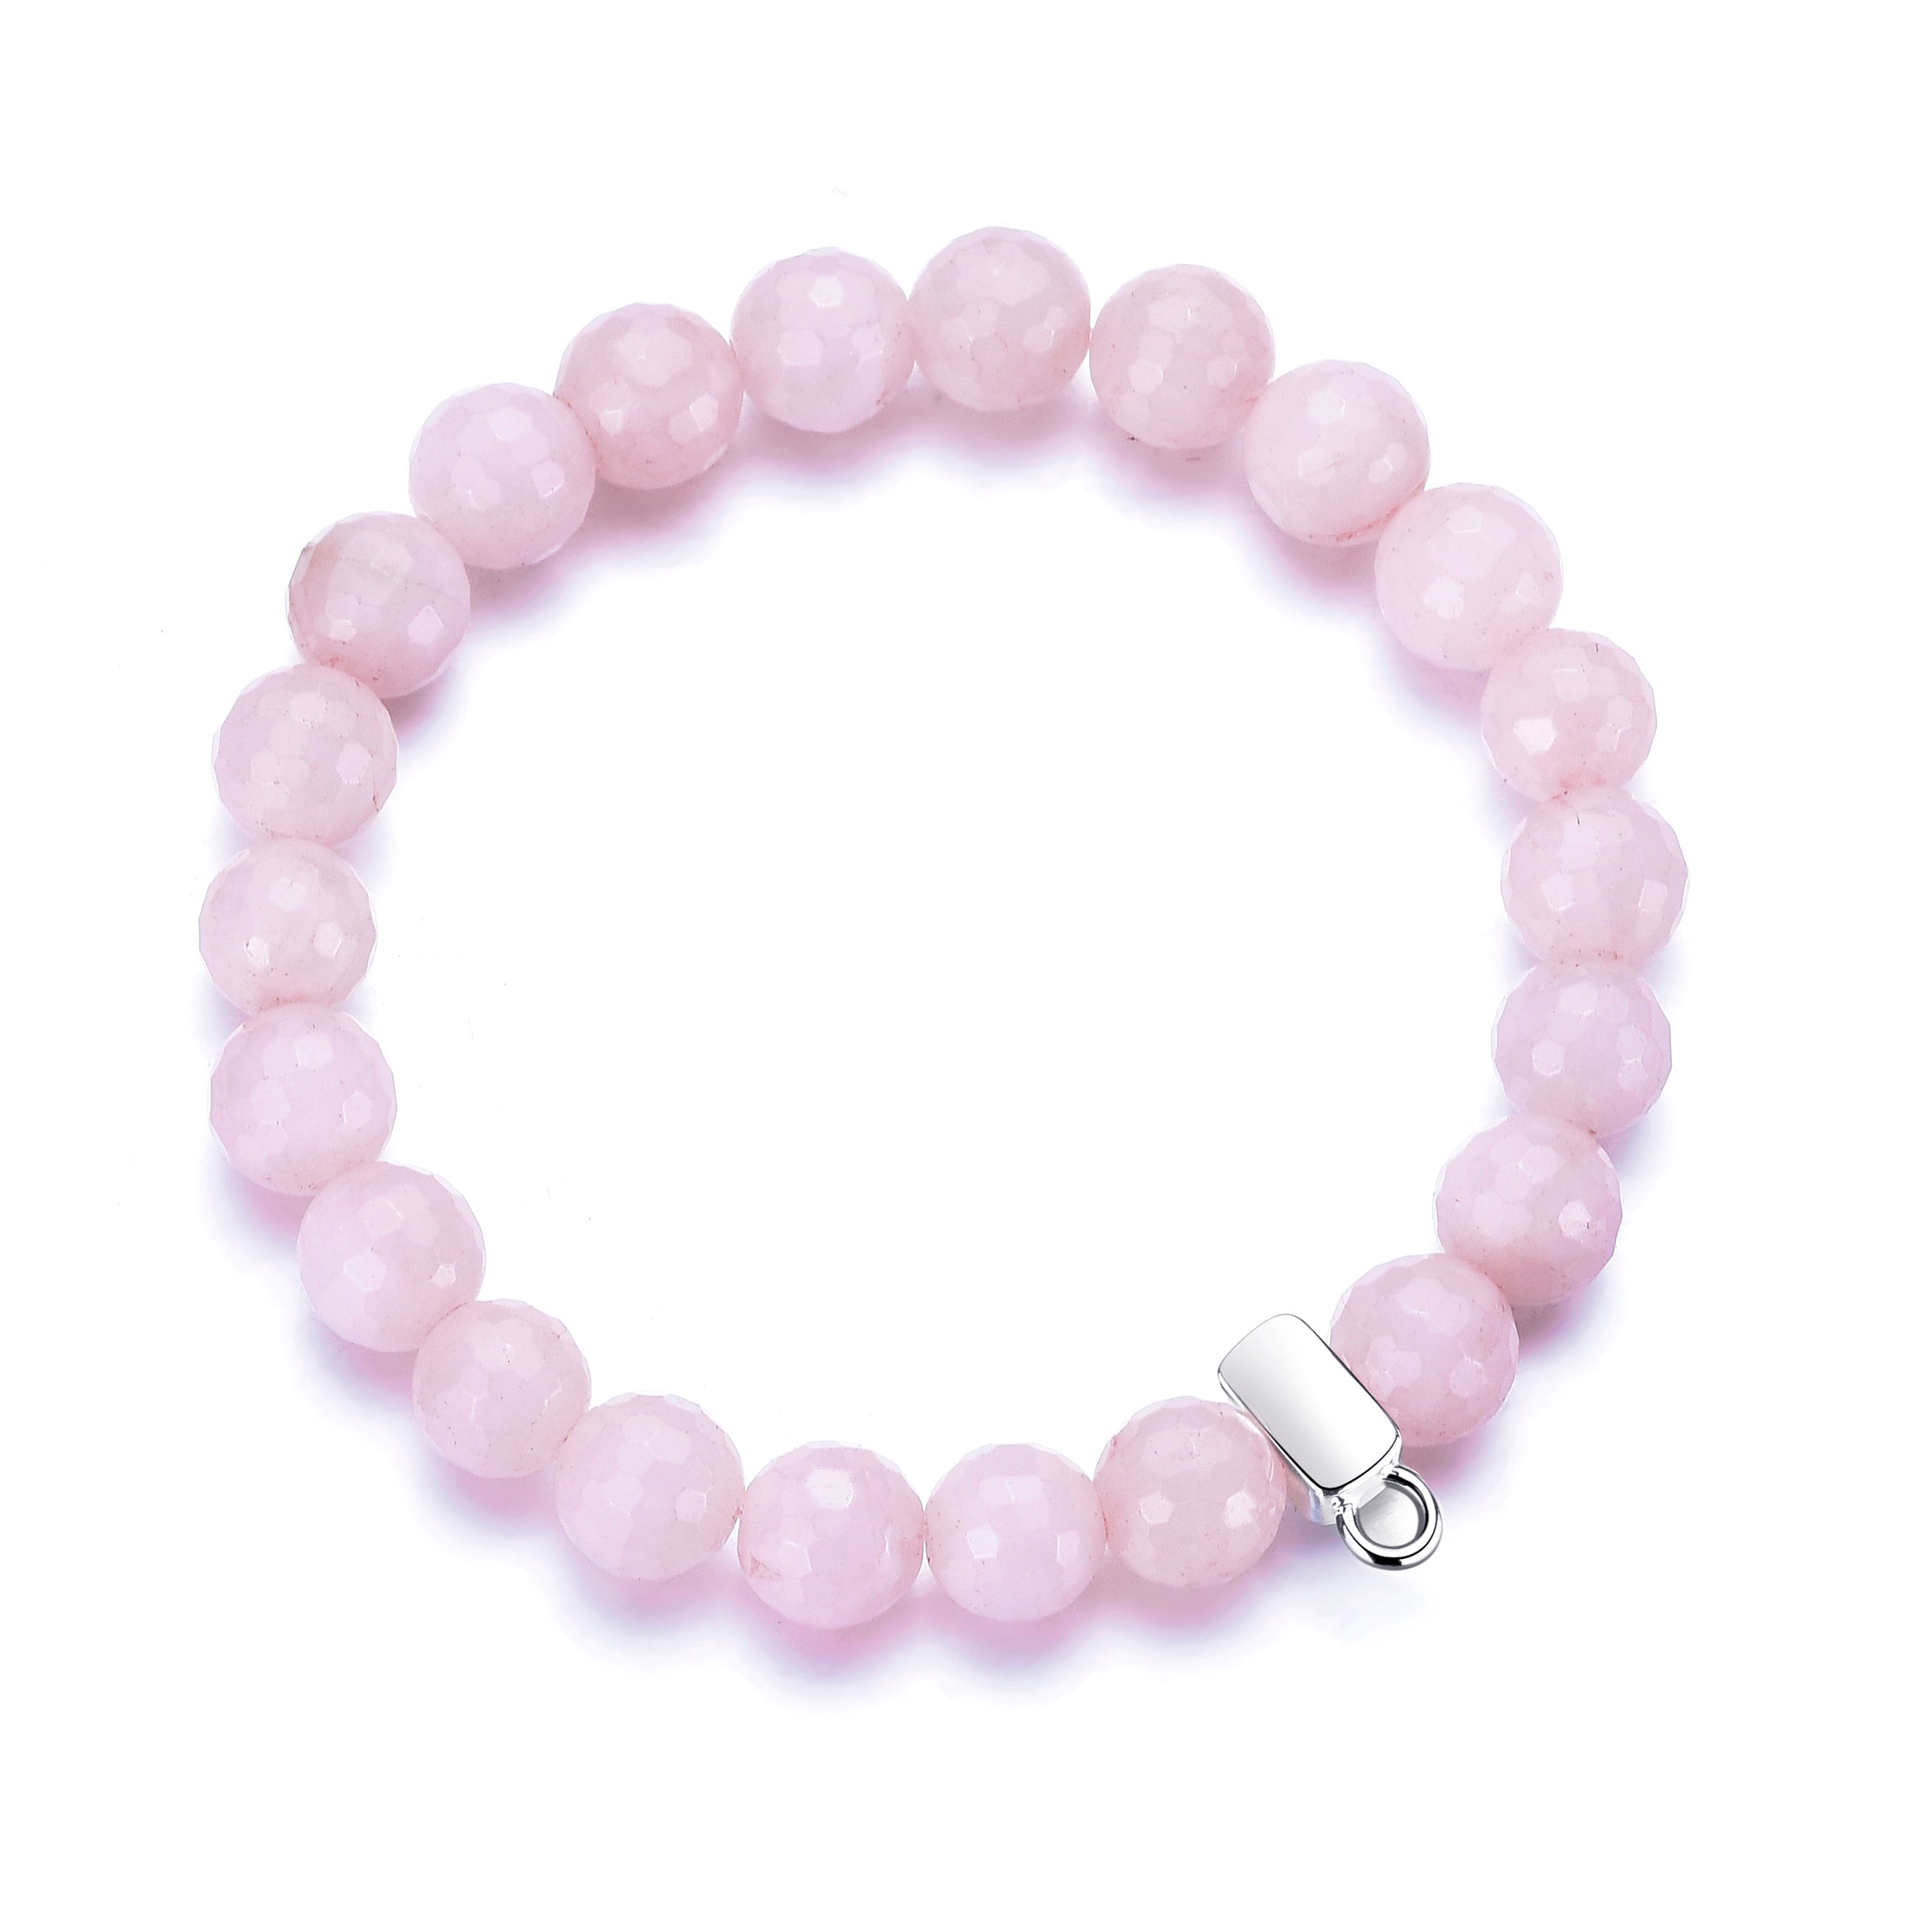 Faceted Rose Quartz Gemstone Stretch Bracelet with Charm Created with Zircondia® Crystals